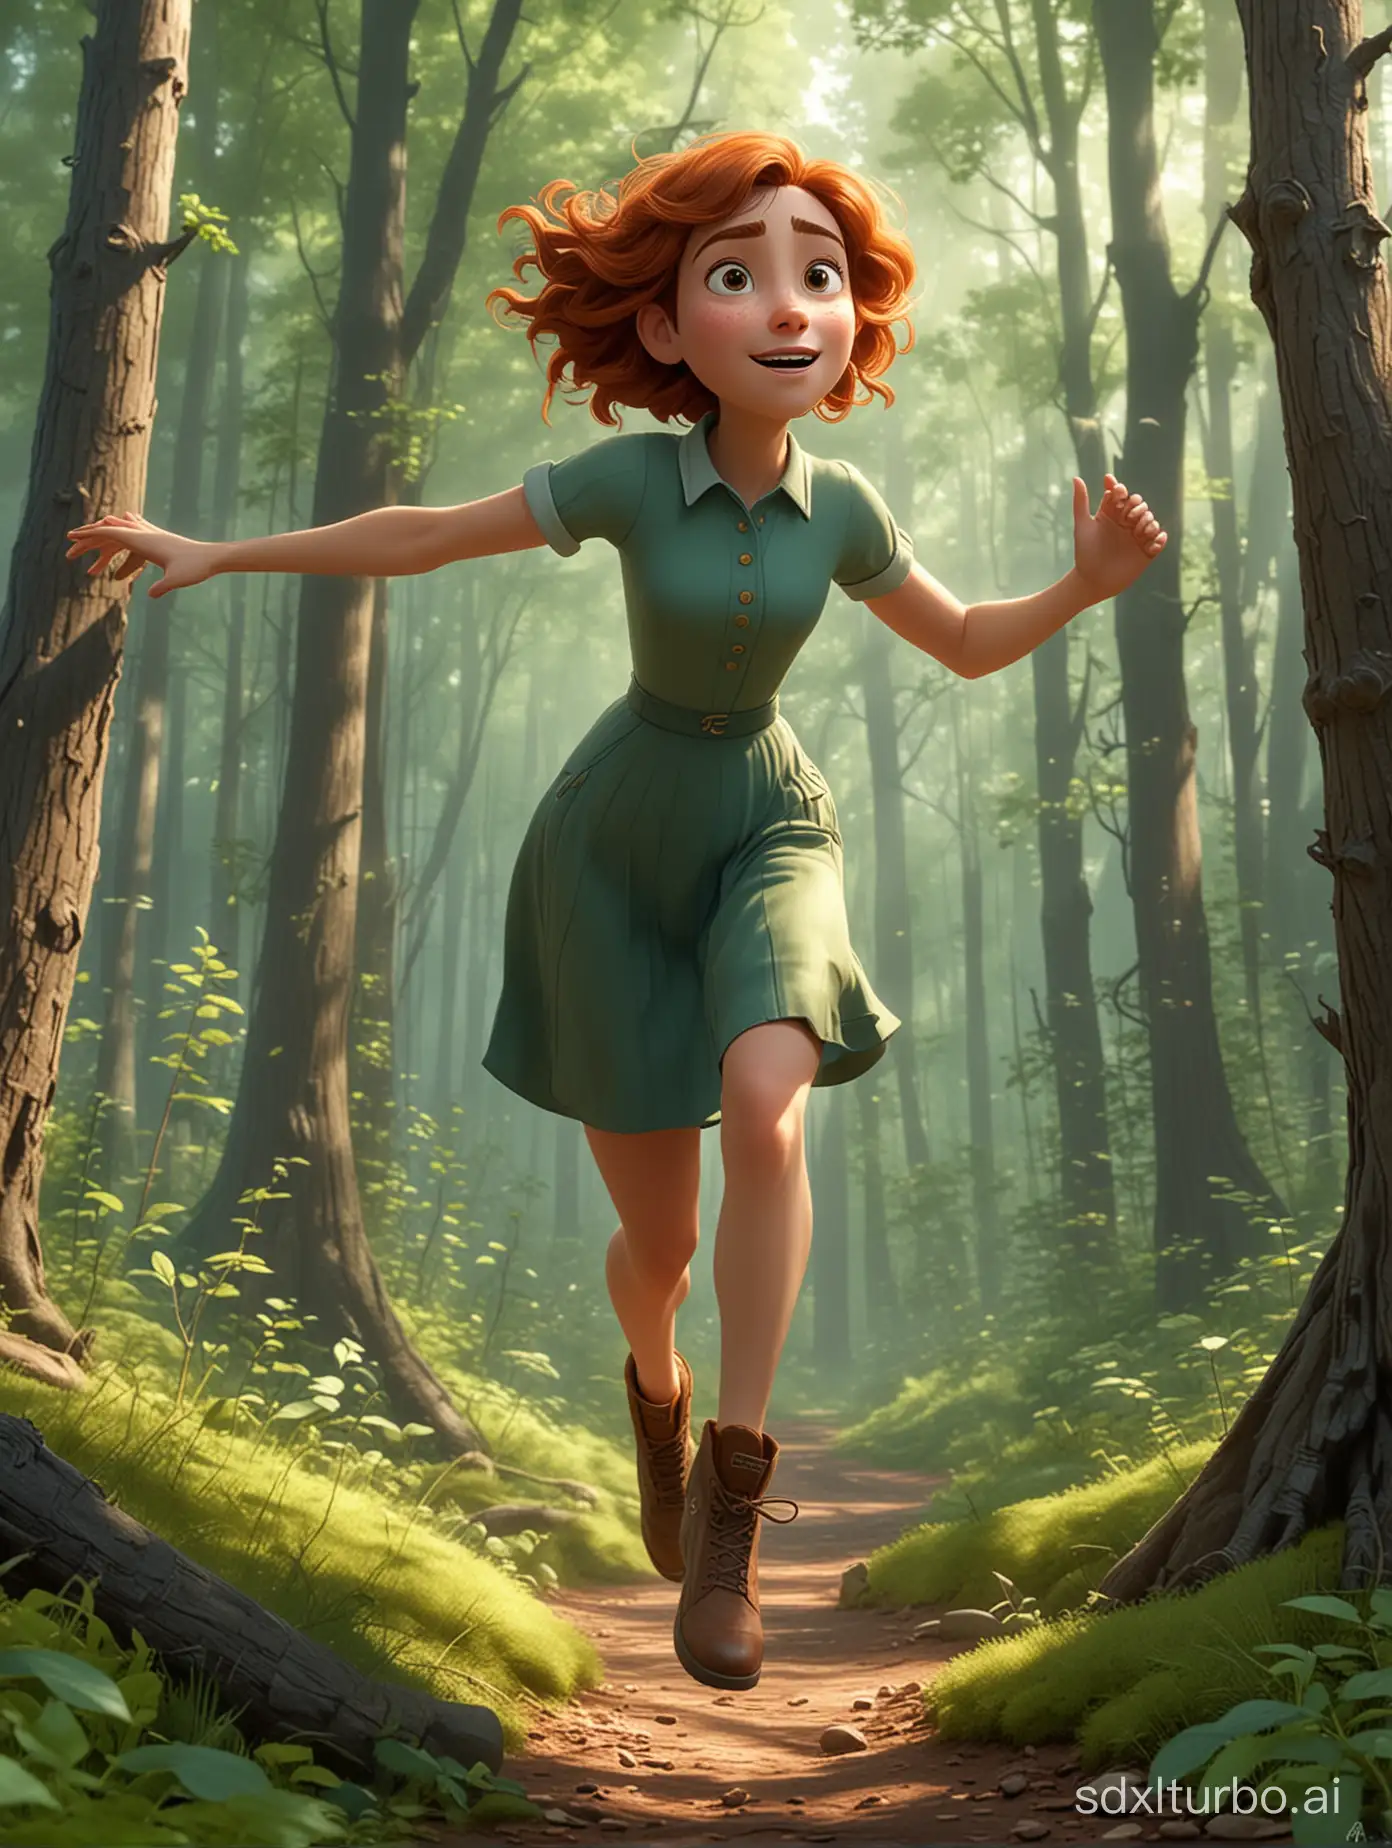 Pixar animation style, a heroine leaping through the woods,